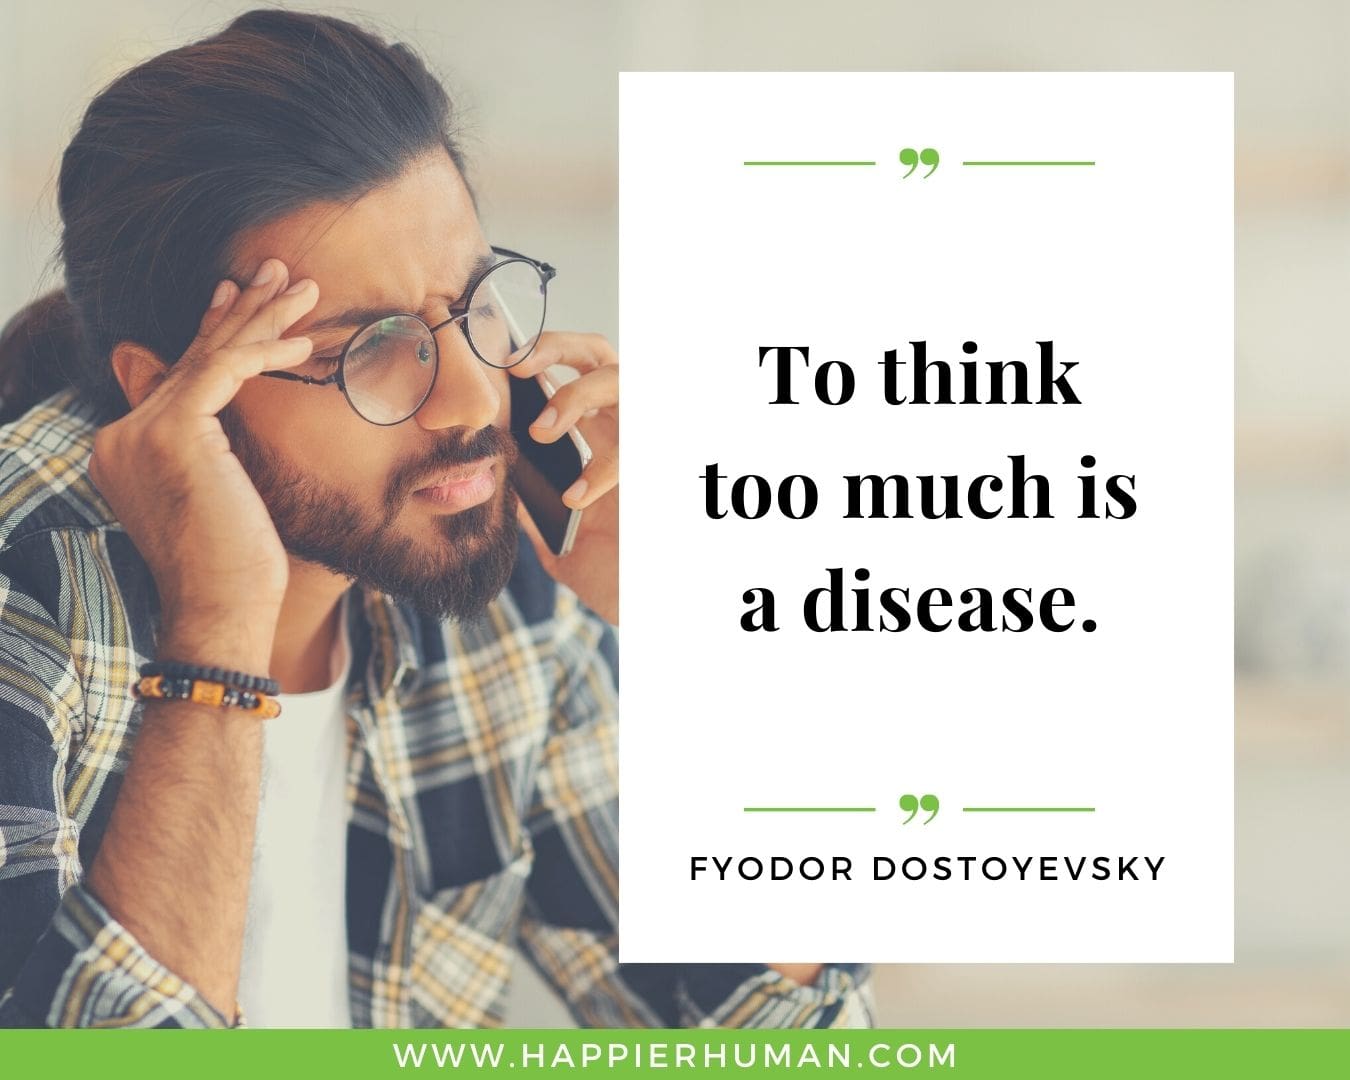 Overthinking Quotes - “To think too much is a disease.” - Fyodor Dostoyevsky